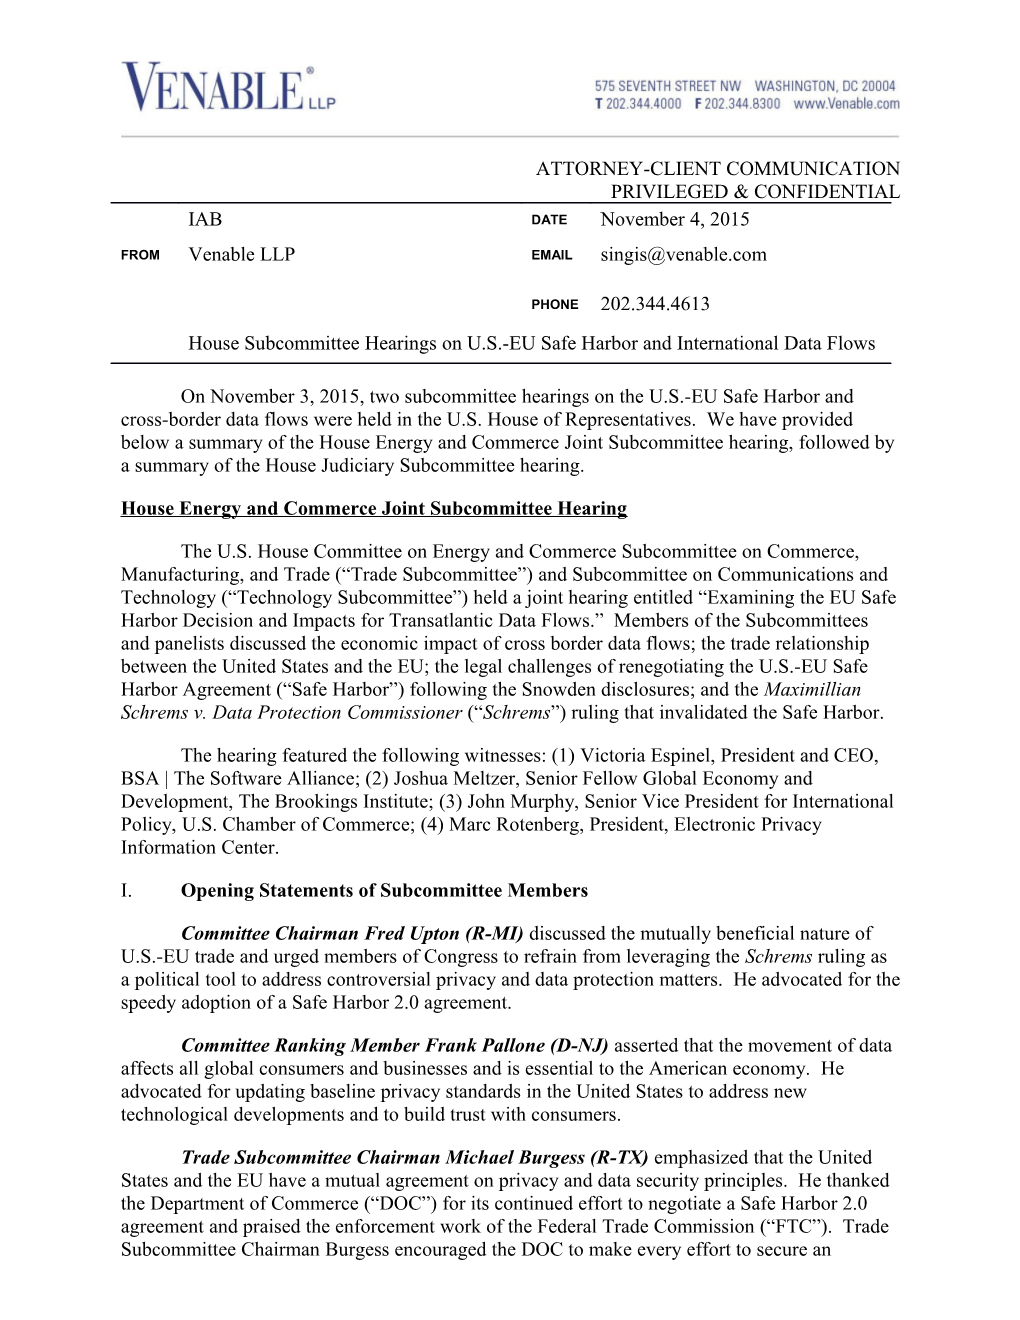 House Energy and Commerce Joint Subcommittee Hearing